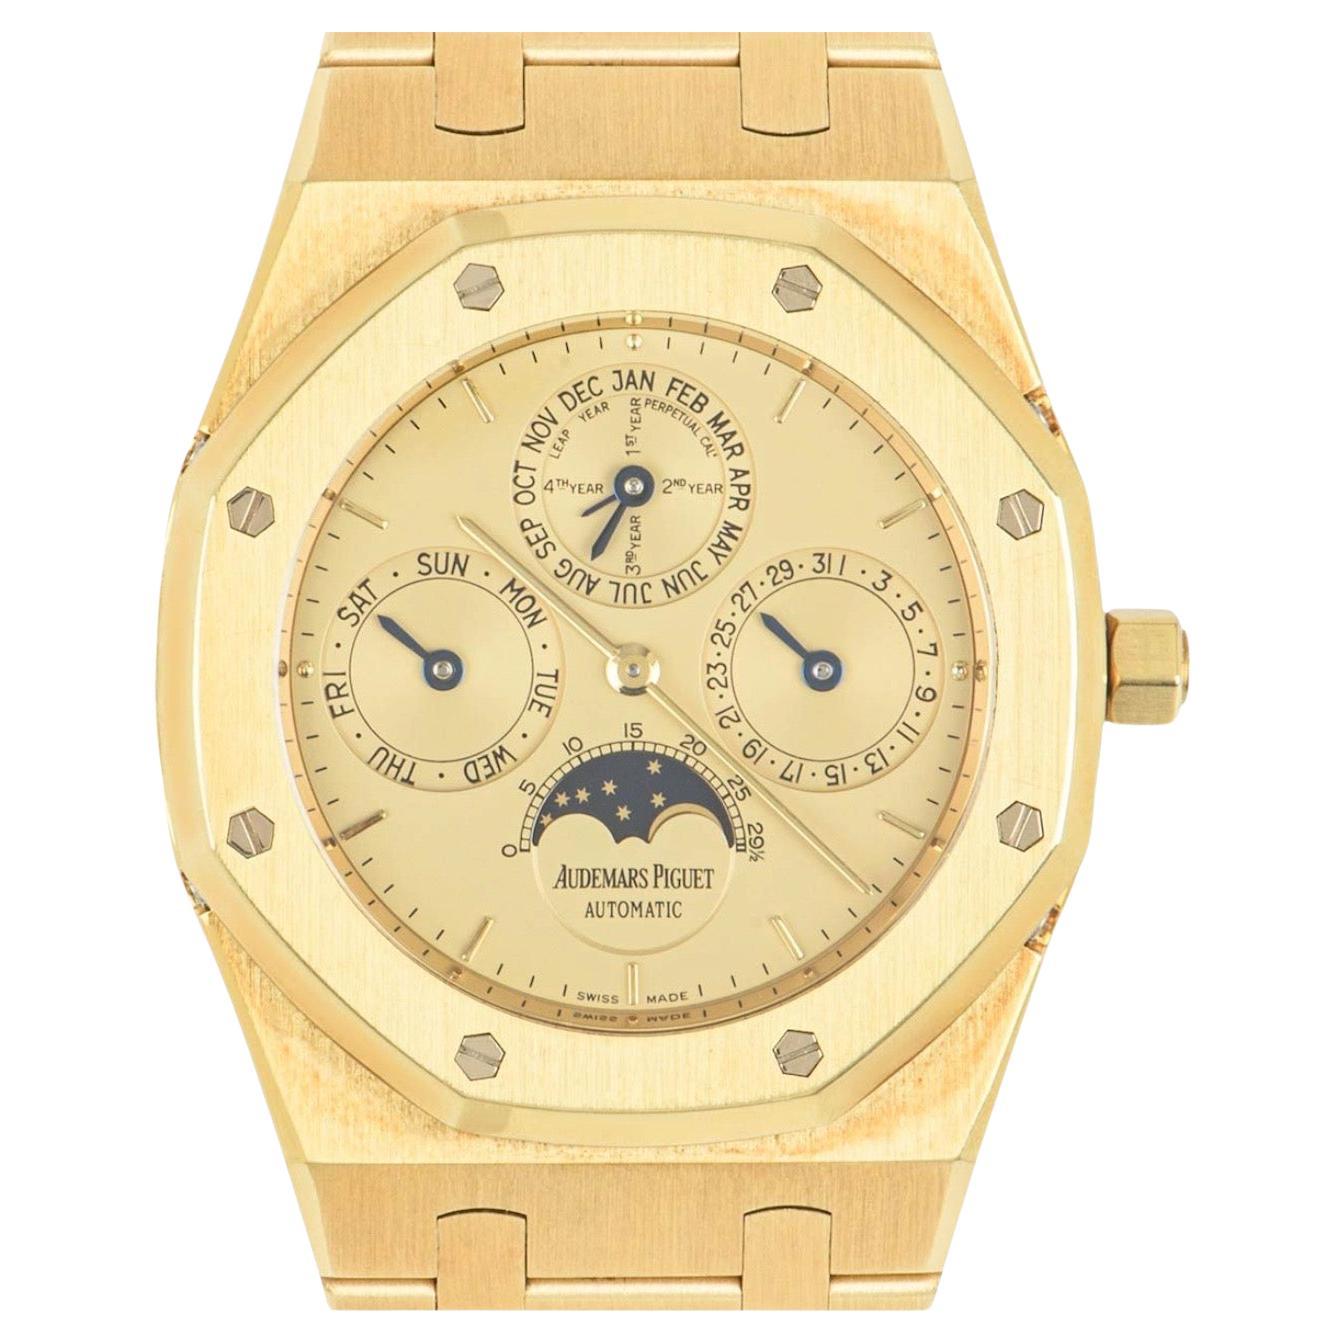 A Perpetual Calendar in yellow gold from Audemars Piguet's Royal Oak collection. Featuring a champagne dial and a bezel featuring the iconic 8 Audemars Piguet screws. The dial itself has displays of the moon phases, the day, the date and the month